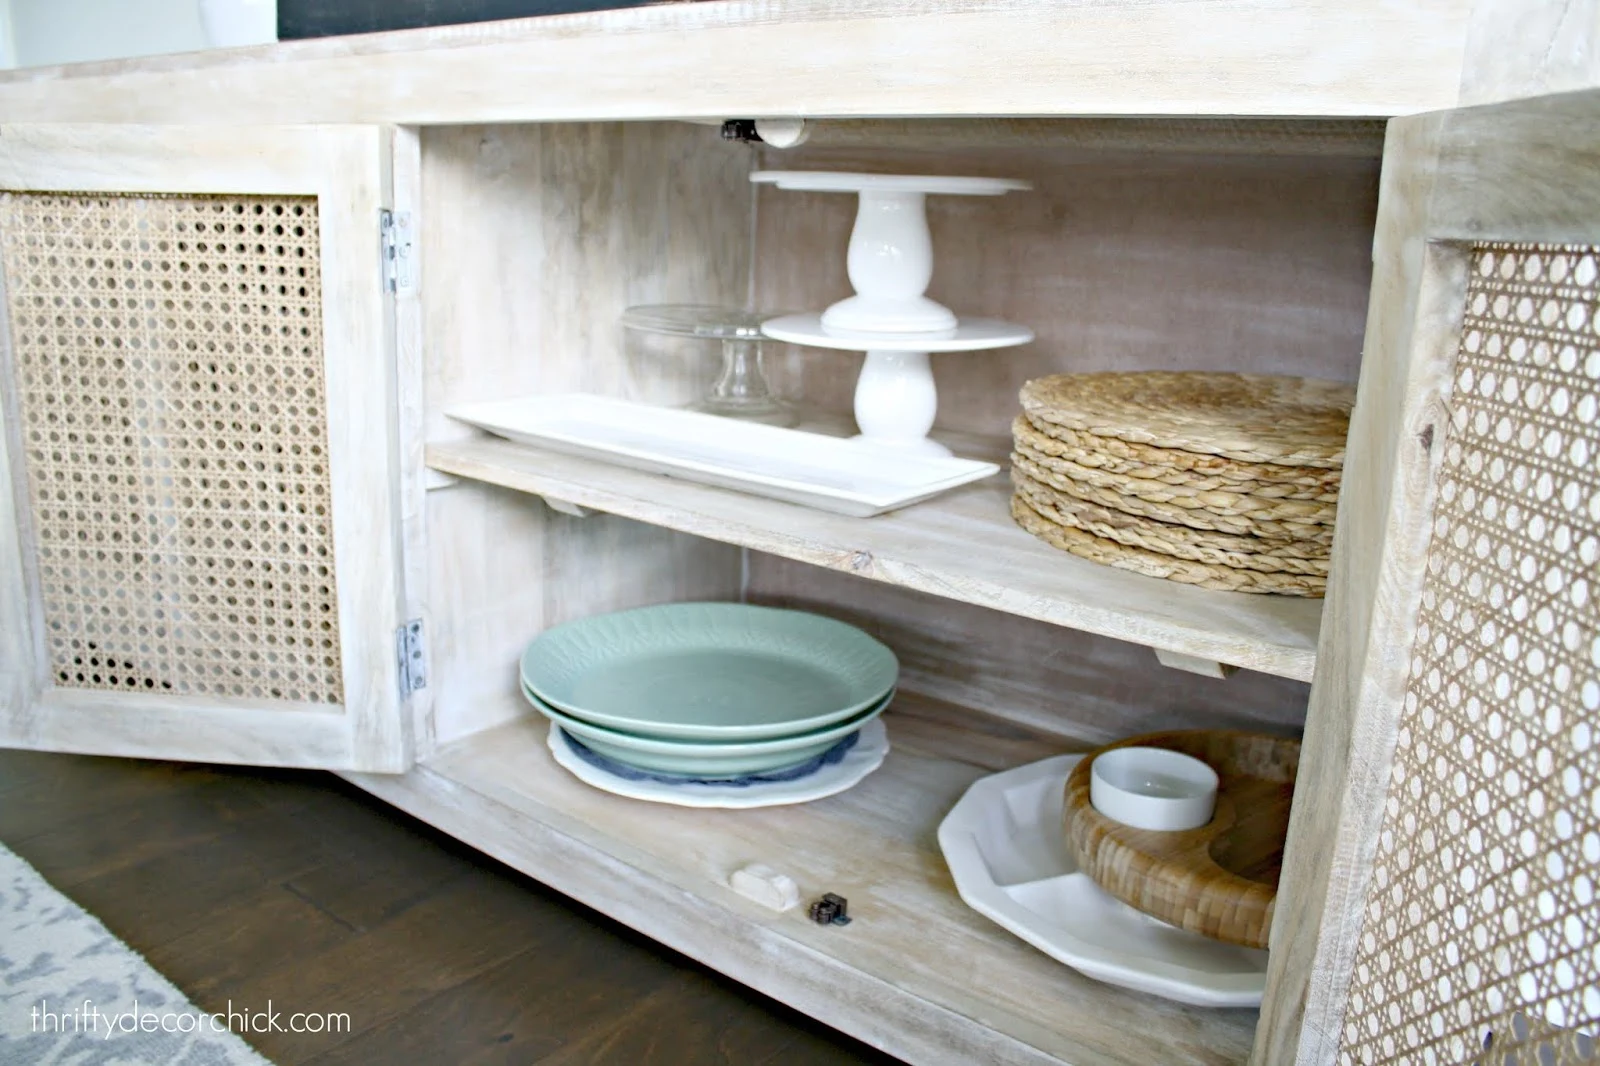 Storing large dishes in dining area